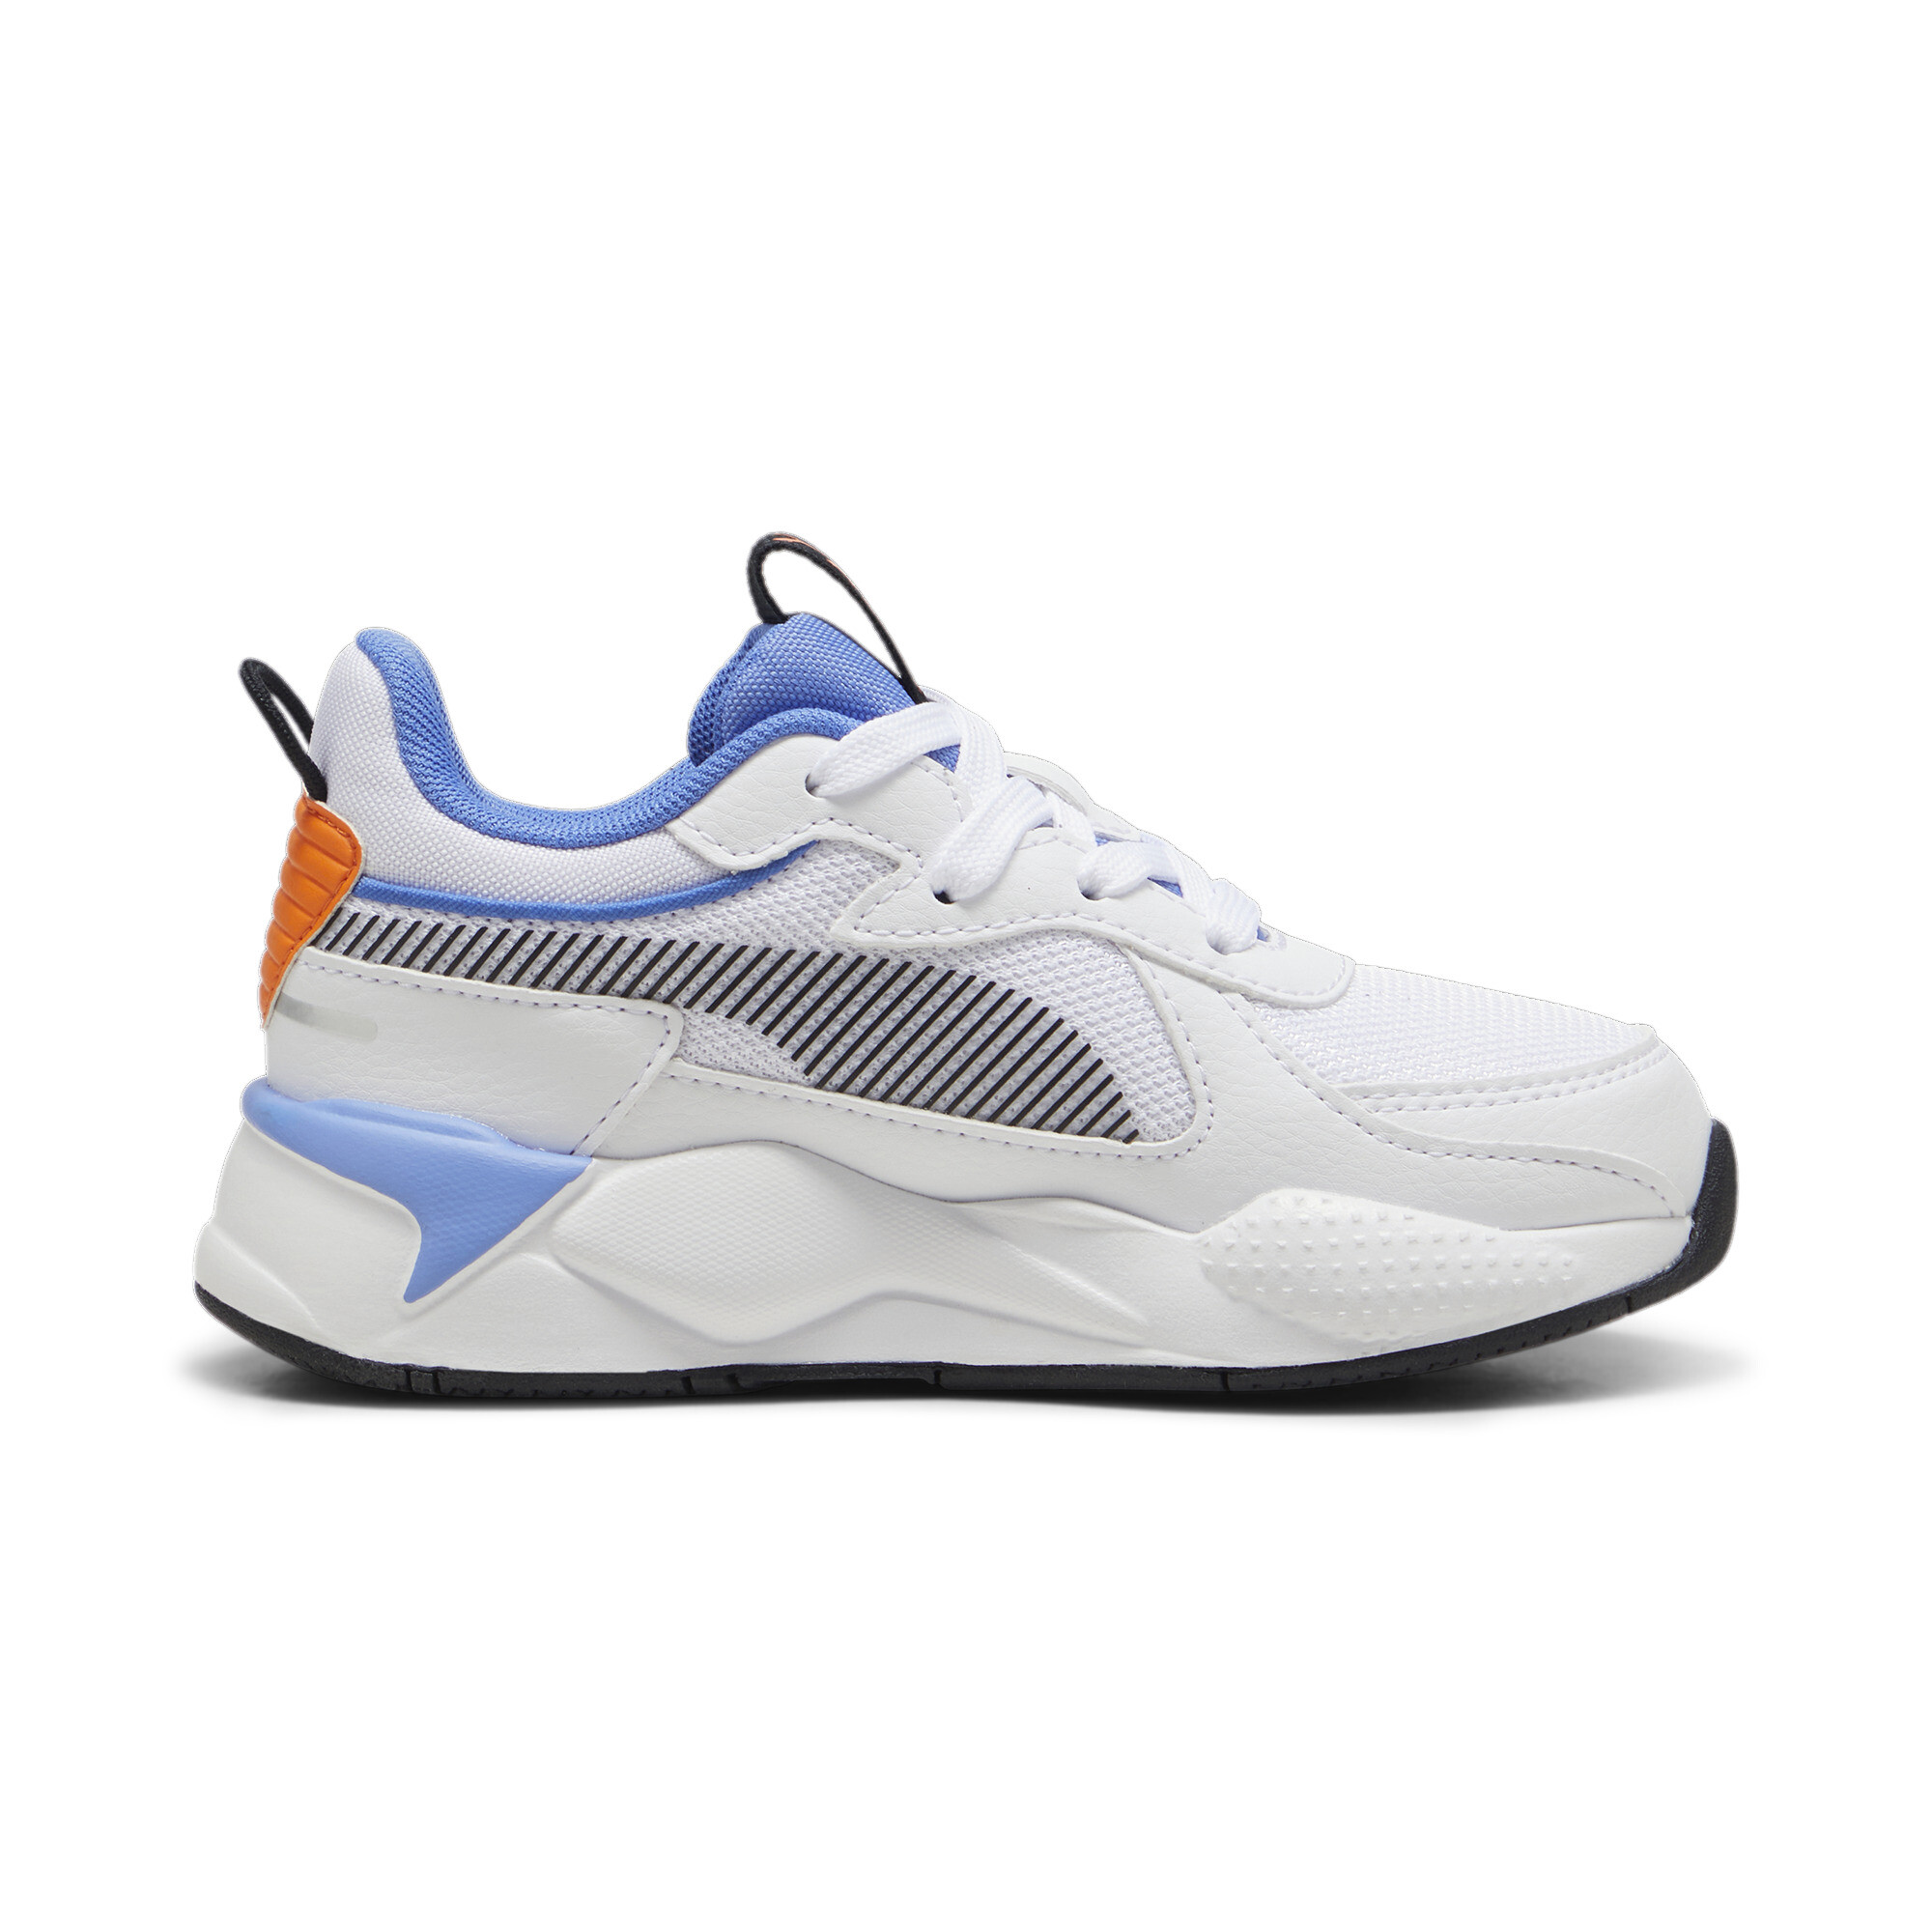 Puma RS-X Kids' Sneakers, White, Size 28, Shoes